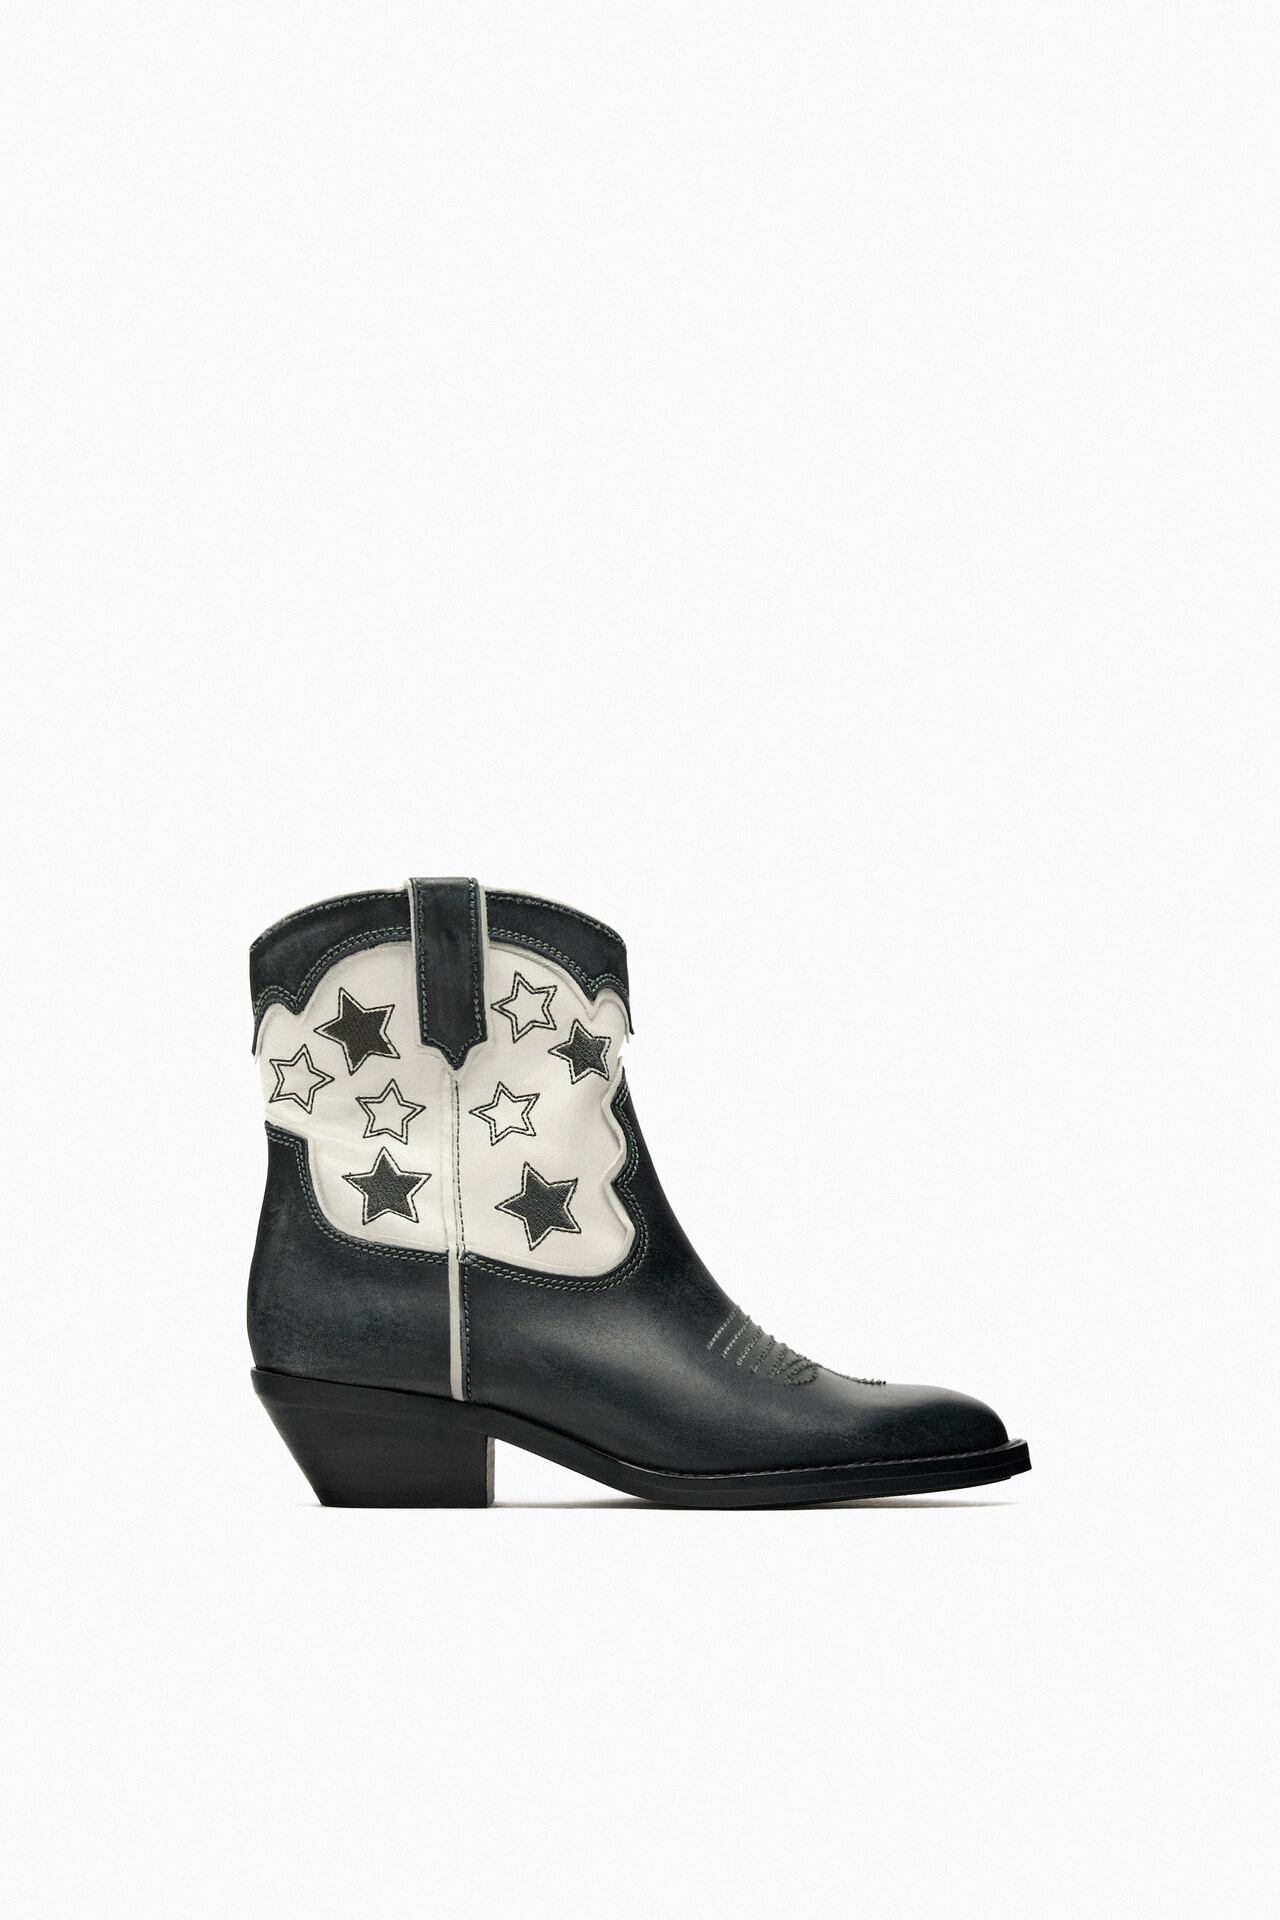 Zara Leather Cowboy Ankle Boots With Stars